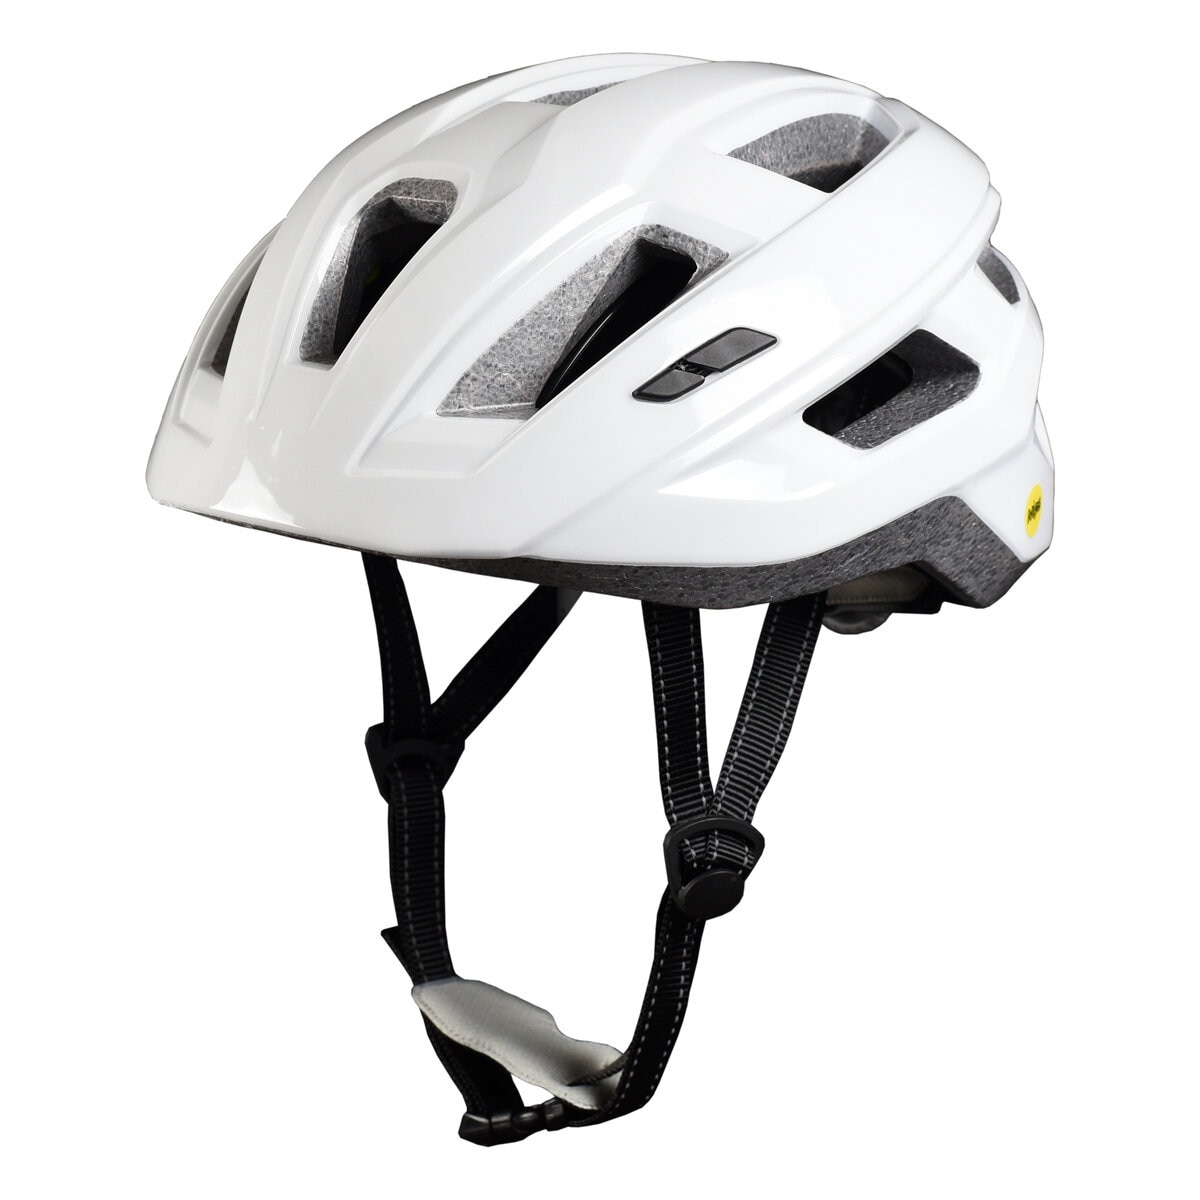 Freetown Lumiere2 Bicycle Helmet with MIPS Technology Asian Fit